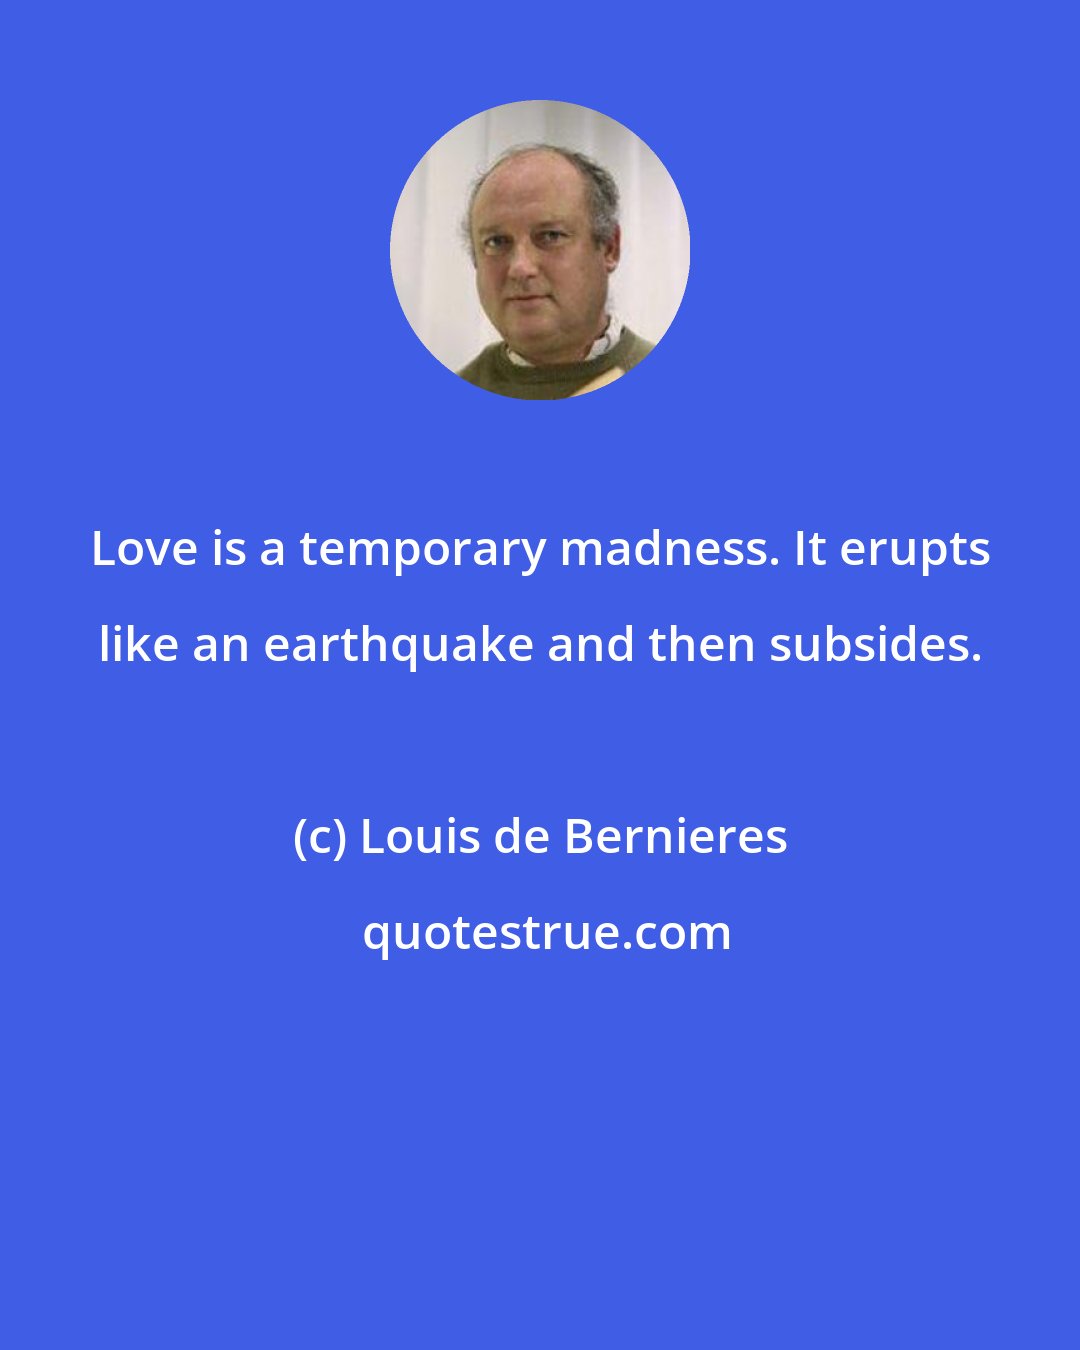 Louis de Bernieres: Love is a temporary madness. It erupts like an earthquake and then subsides.